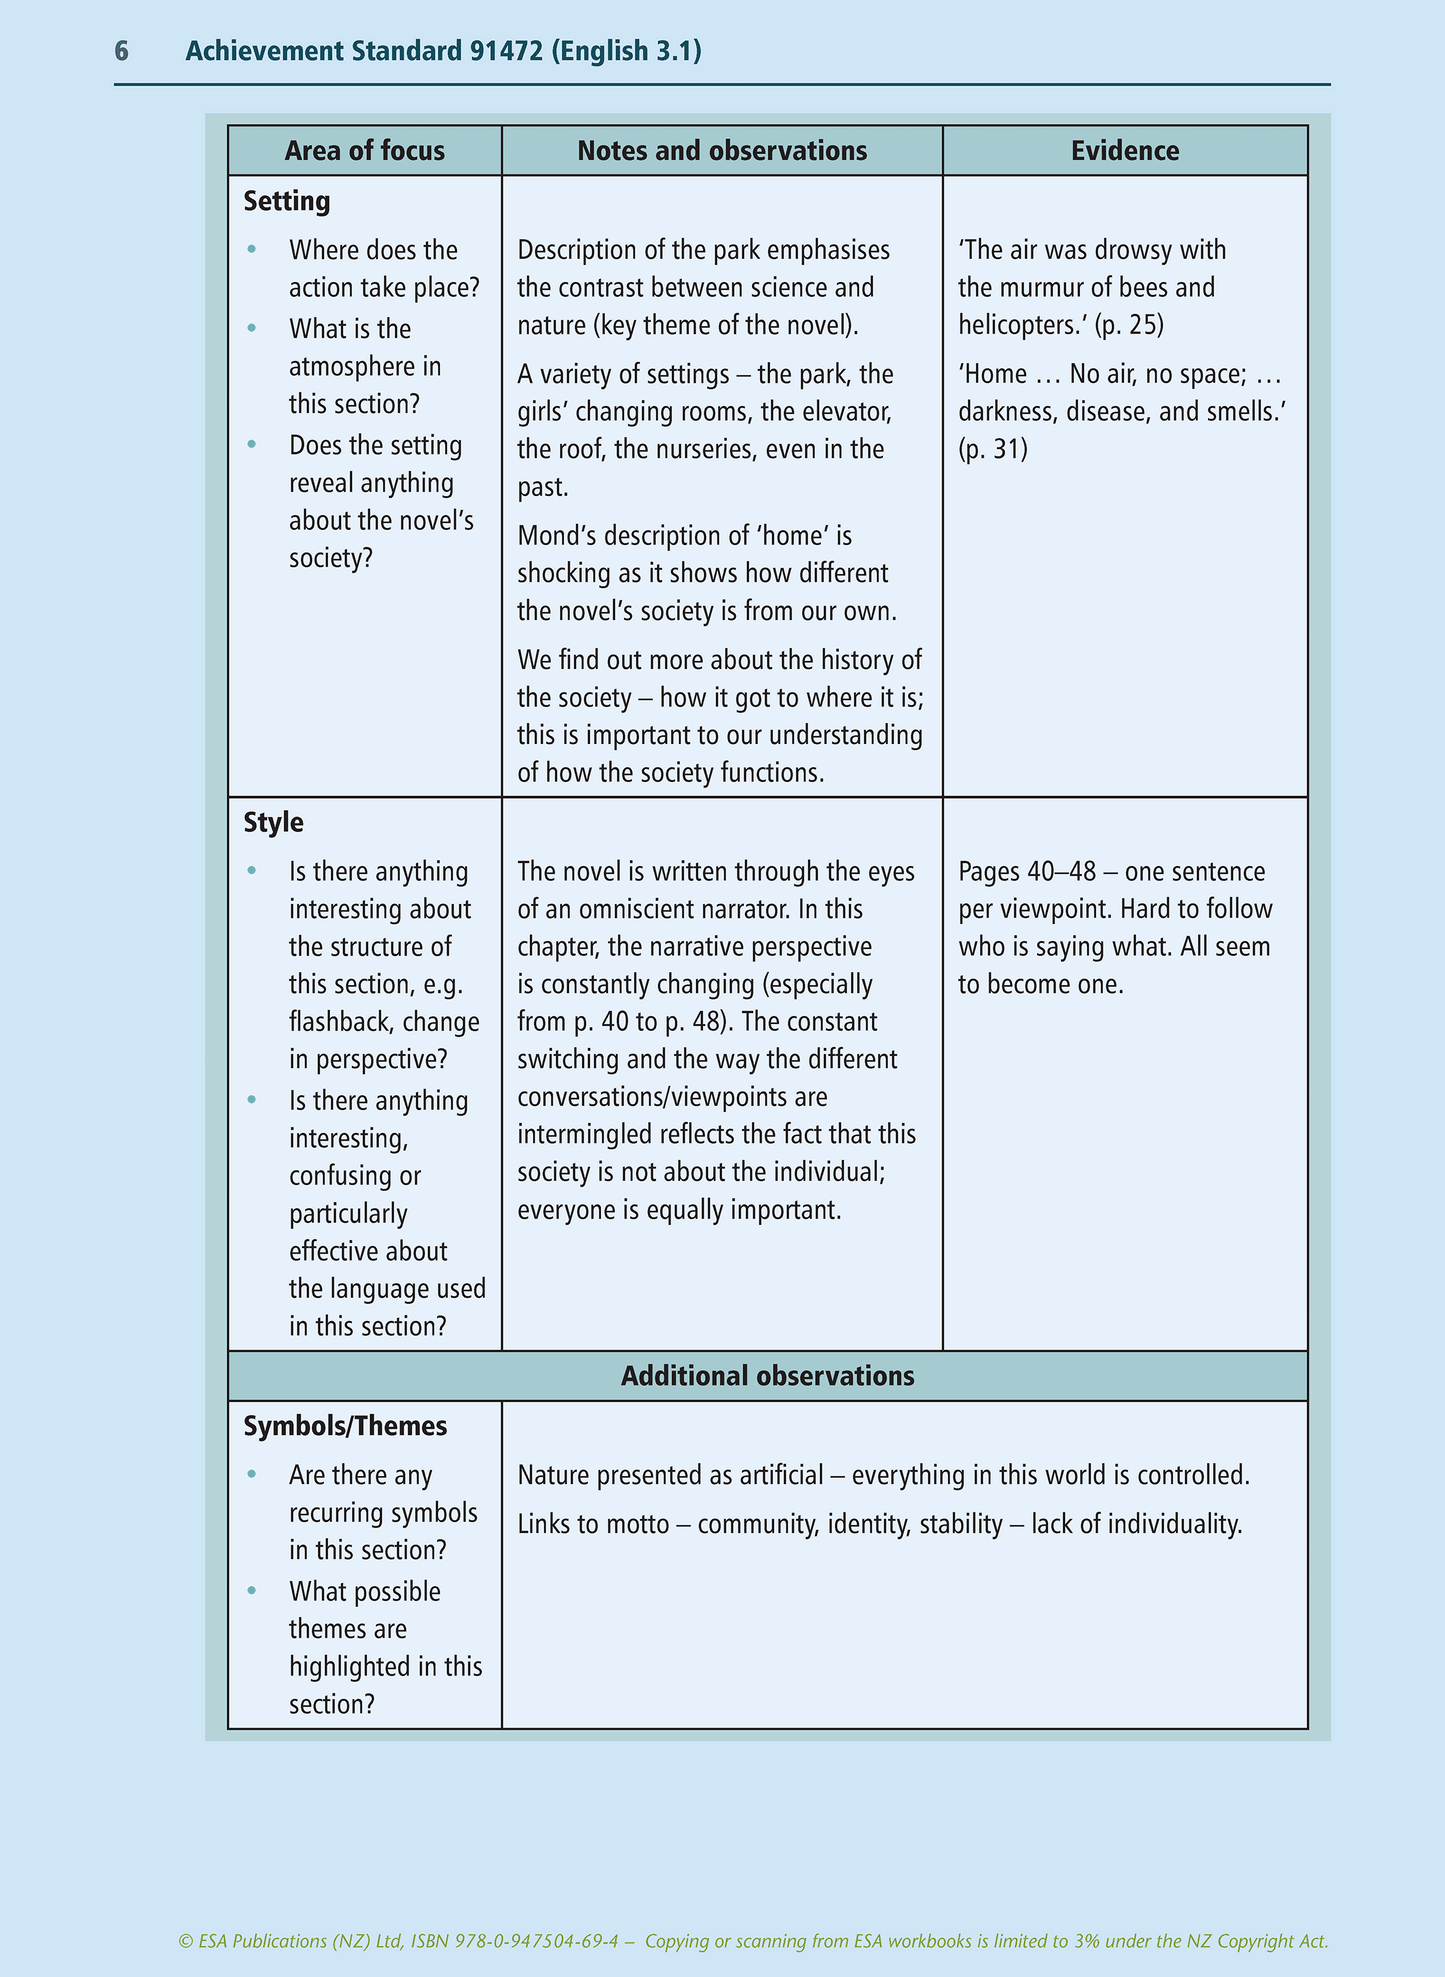 Level 3 Response to Written Texts 3.1 Learning Workbook